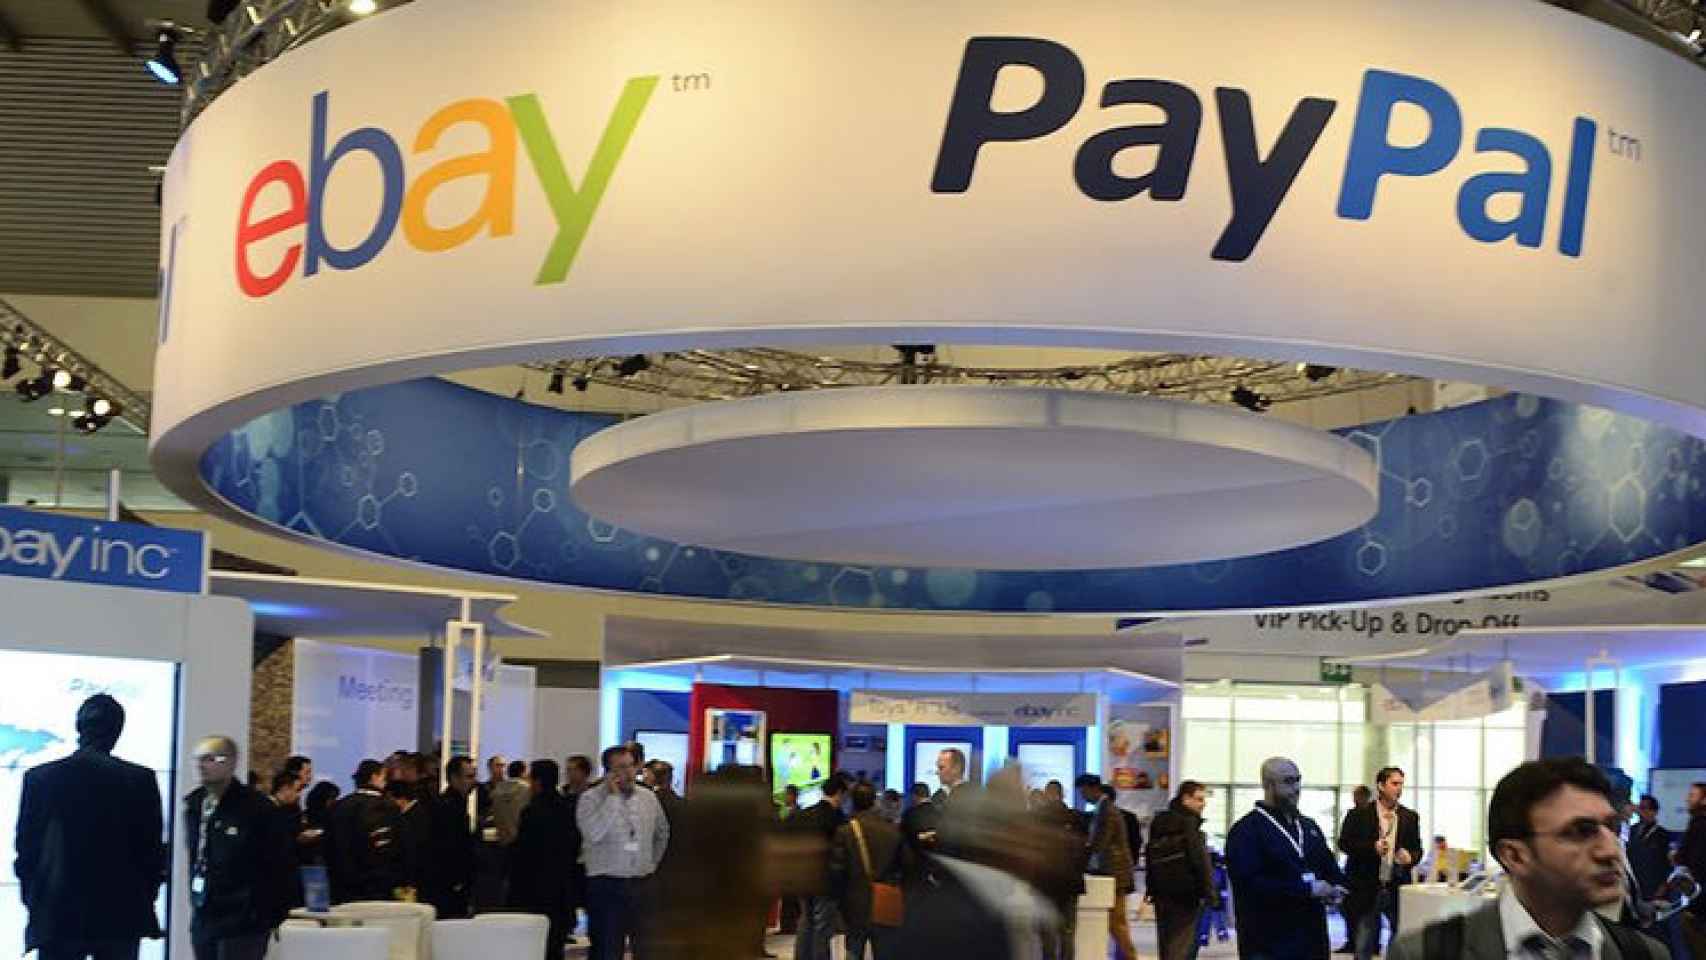 ebay paypal pay in 4